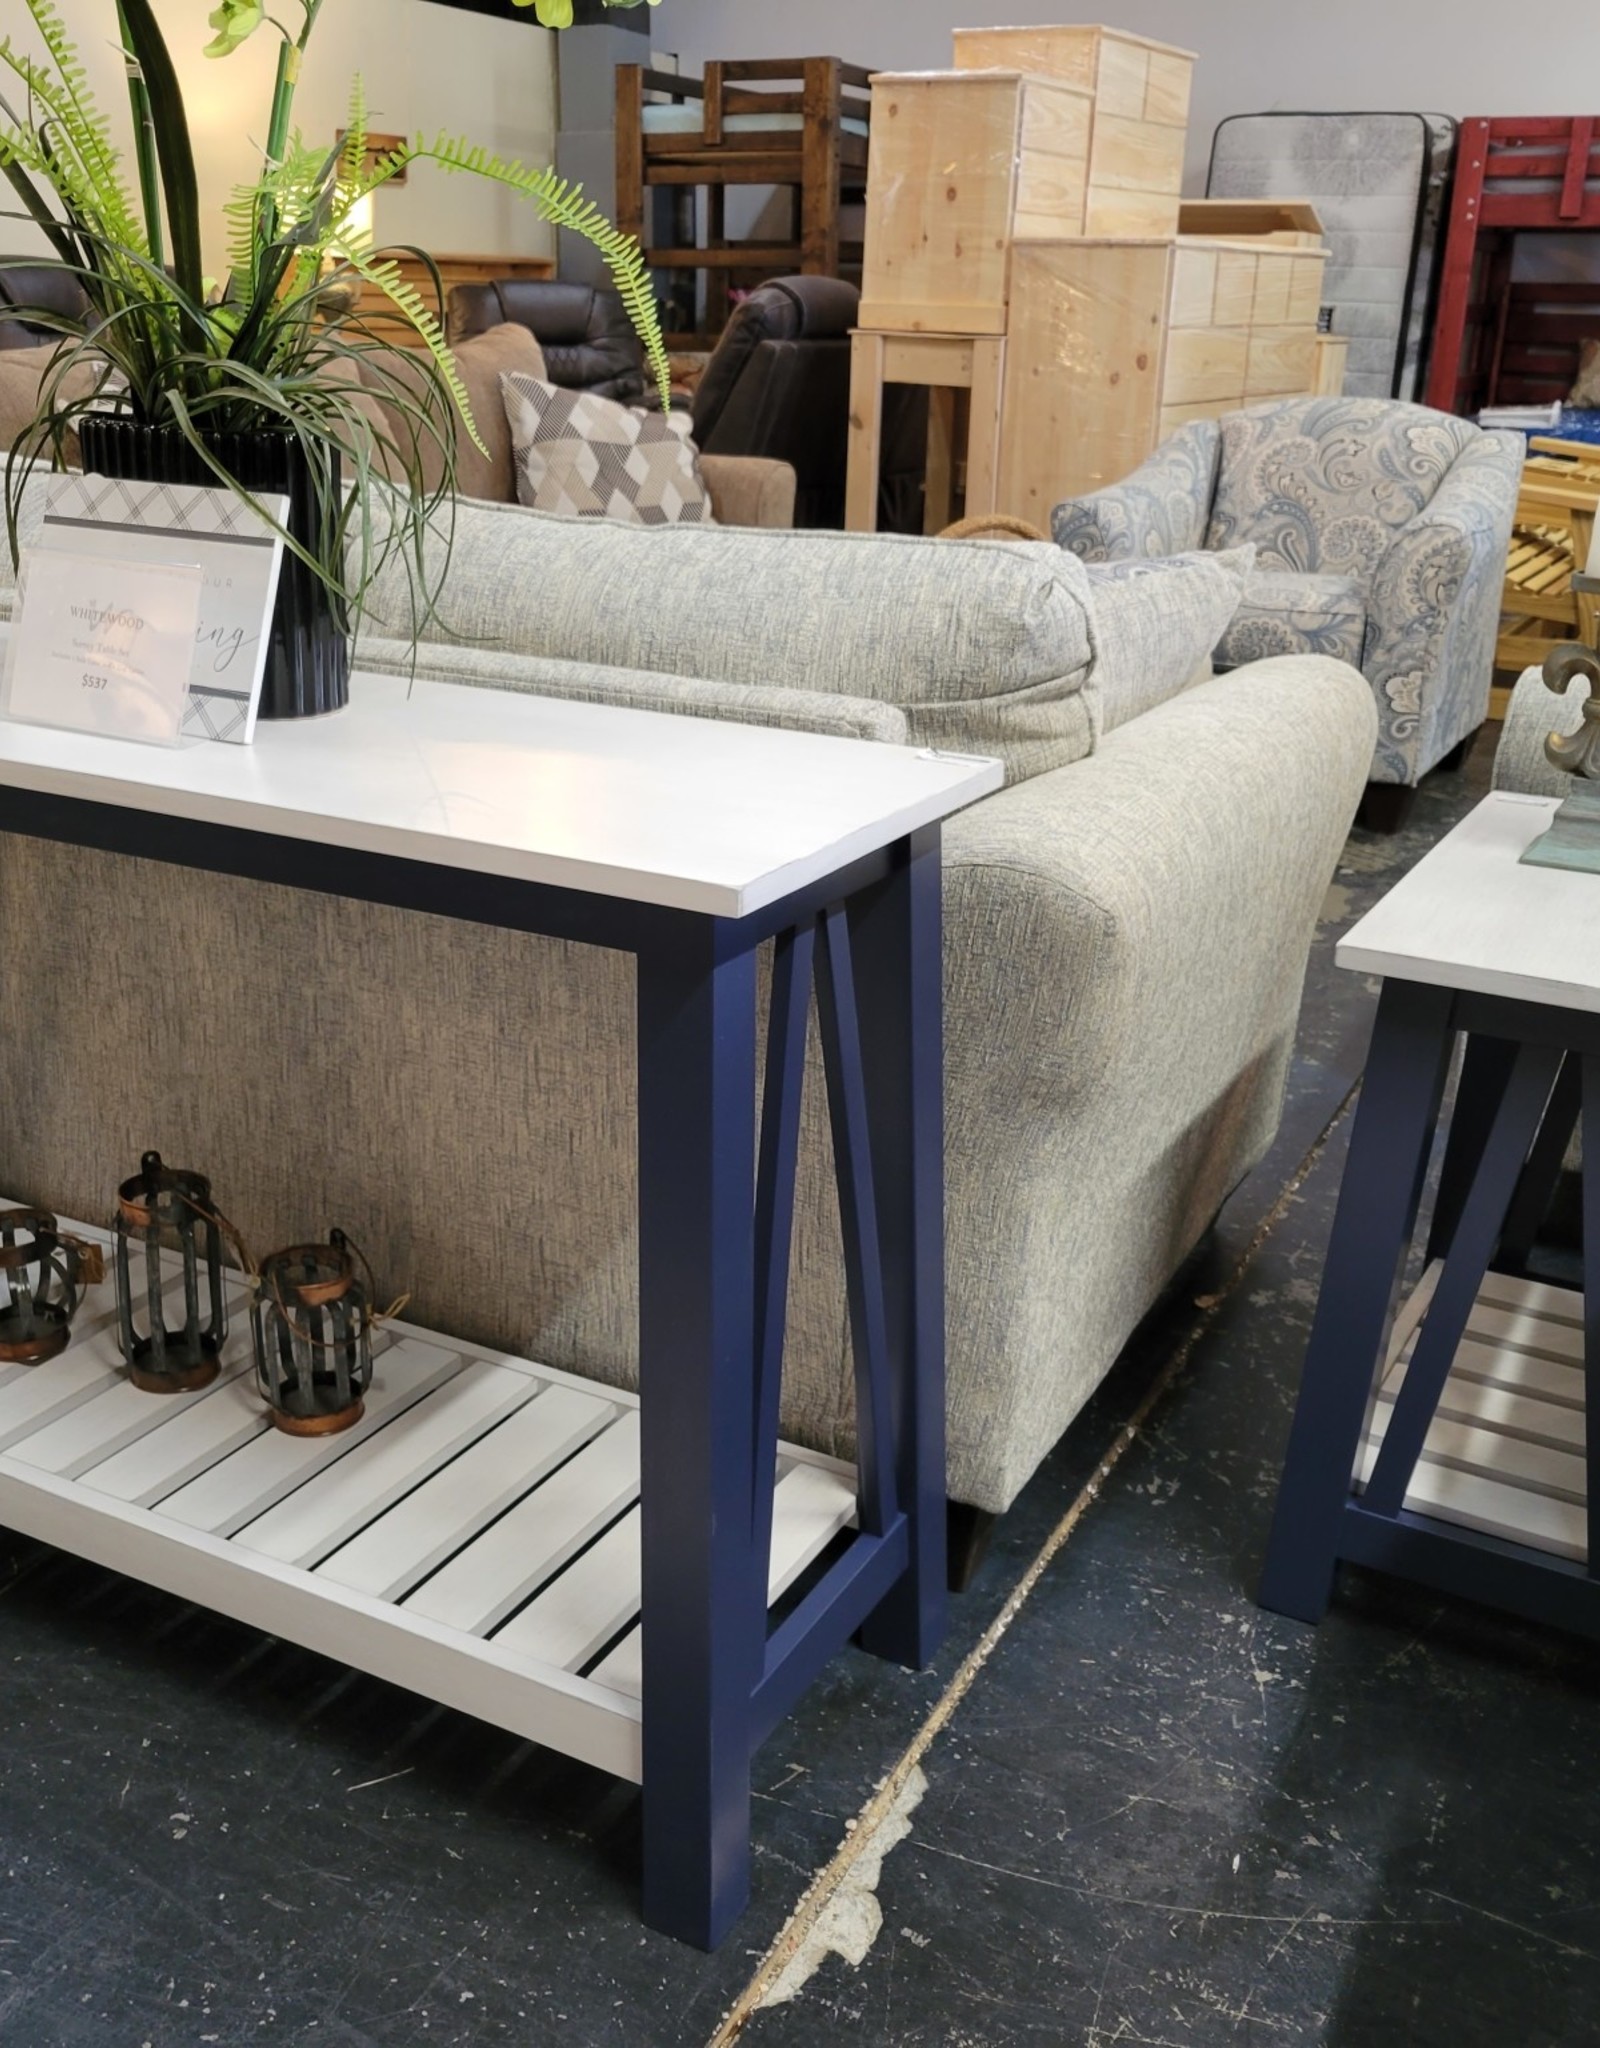 Whitewood Surrey Sofa Table - Specify Color (Blue/White or Gray/White)